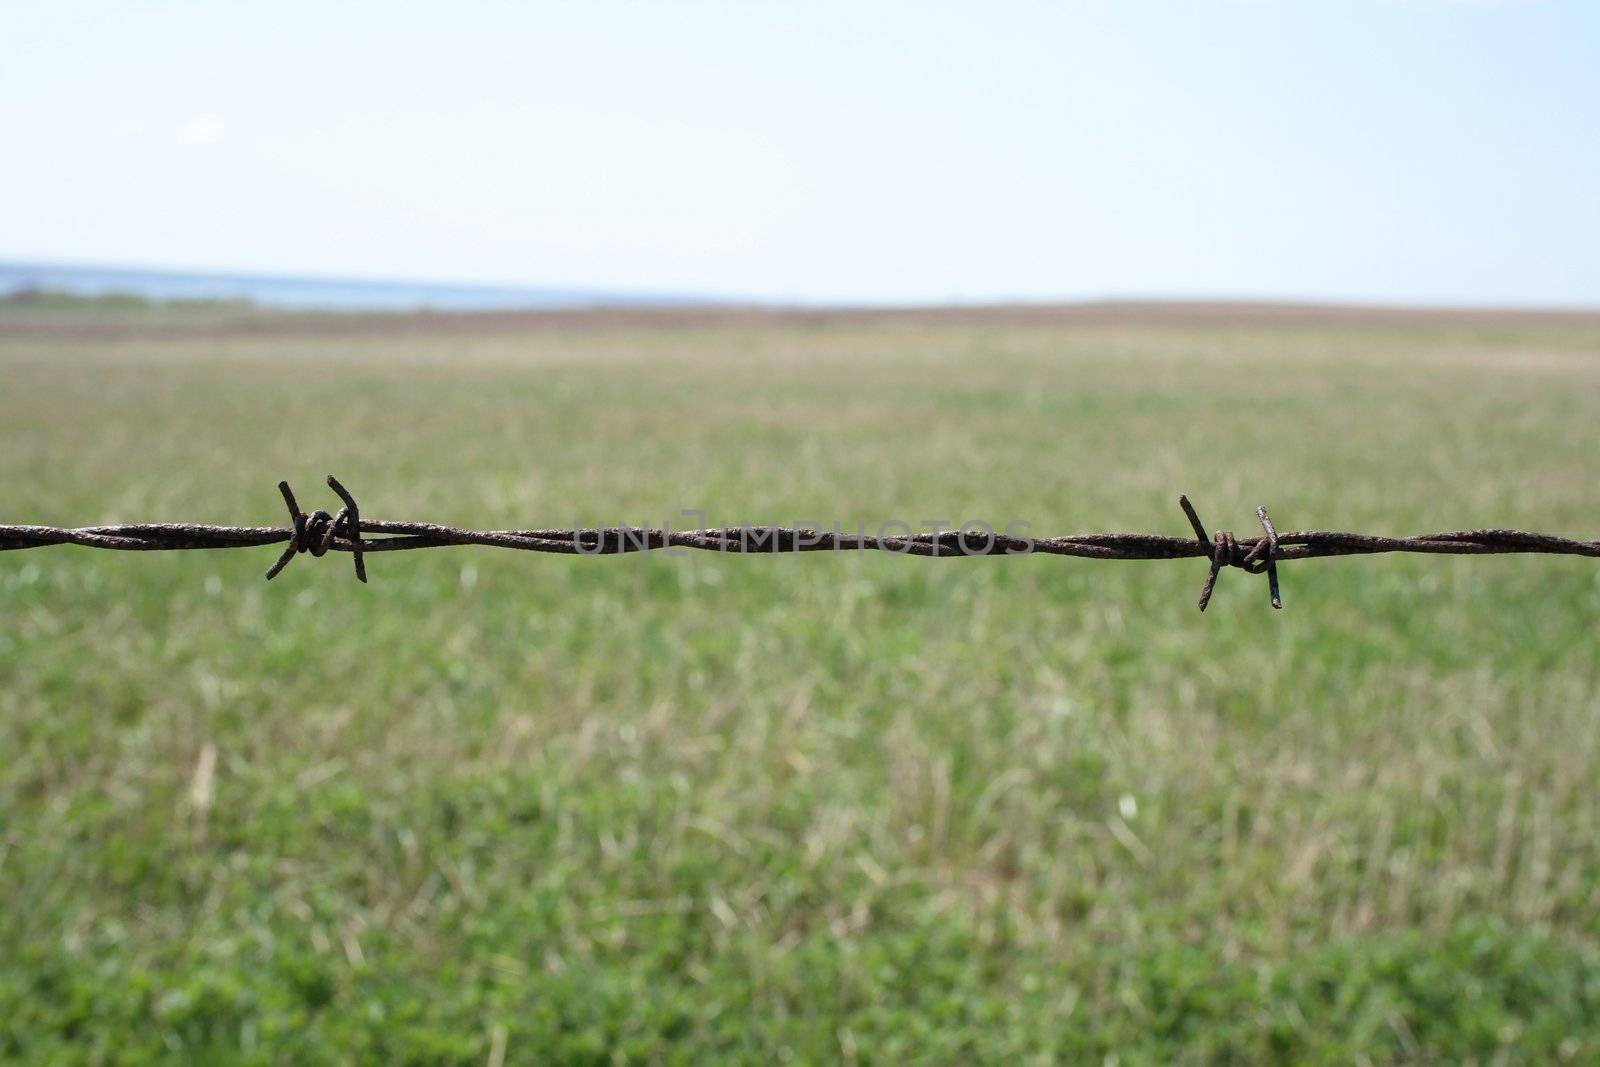 Rusty barbed wire fence detail. Shallow depth of field with green blurry field in the background.